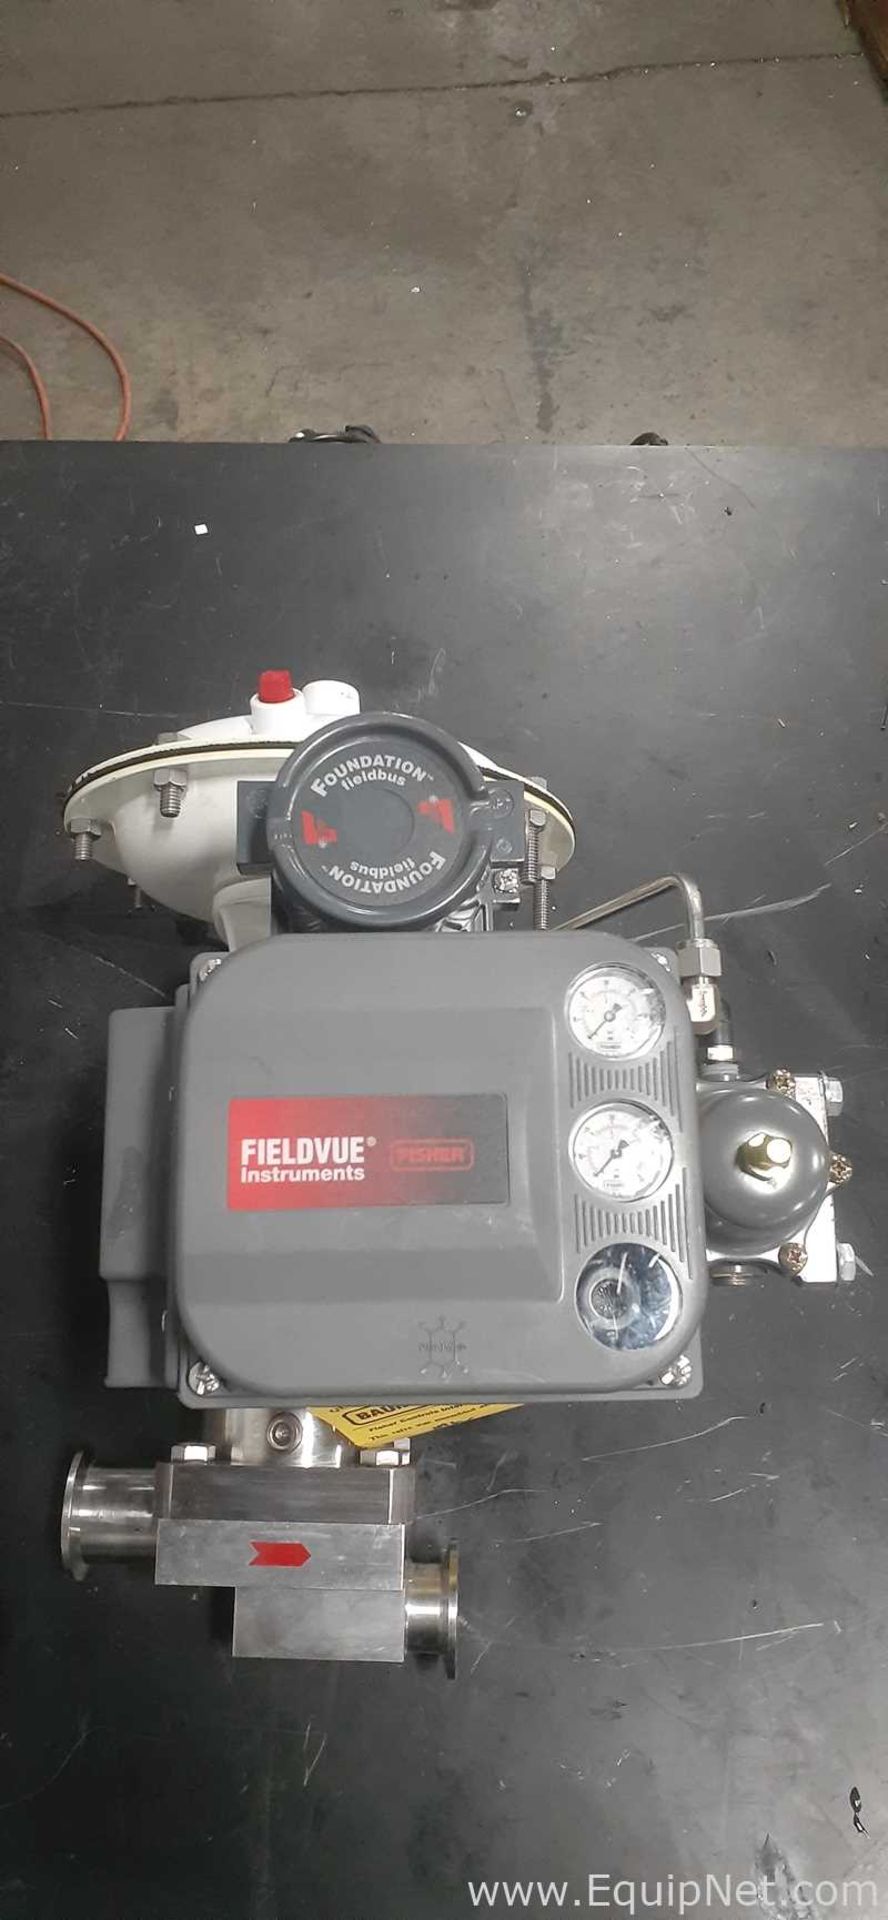 Fieldvue Digital Valve Controller with 1in. Sanitary Angle Control Valve